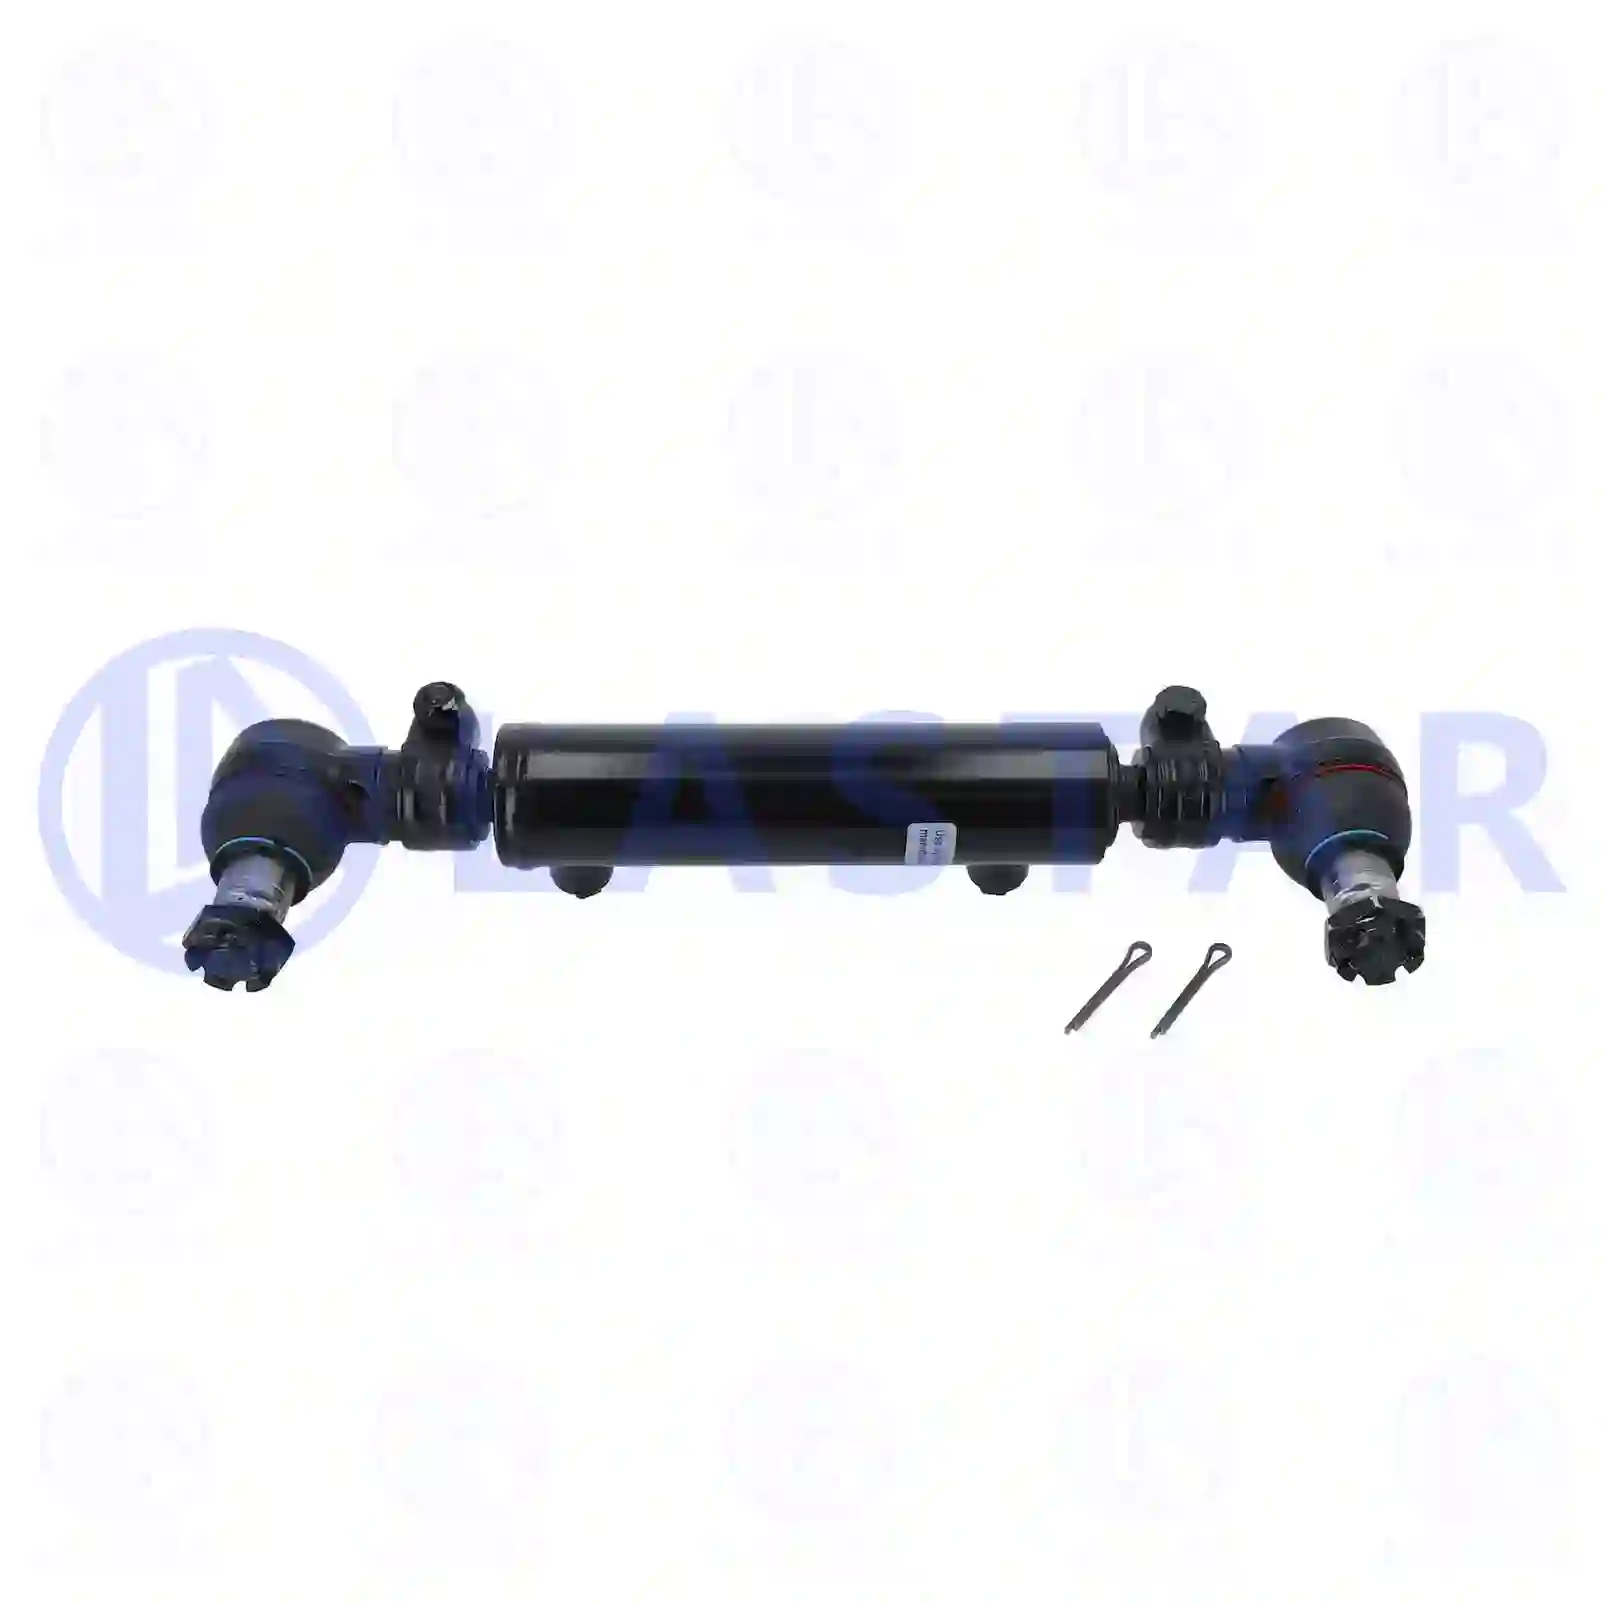 Steering cylinder, 77705786, 5010294027, , , , , ||  77705786 Lastar Spare Part | Truck Spare Parts, Auotomotive Spare Parts Steering cylinder, 77705786, 5010294027, , , , , ||  77705786 Lastar Spare Part | Truck Spare Parts, Auotomotive Spare Parts